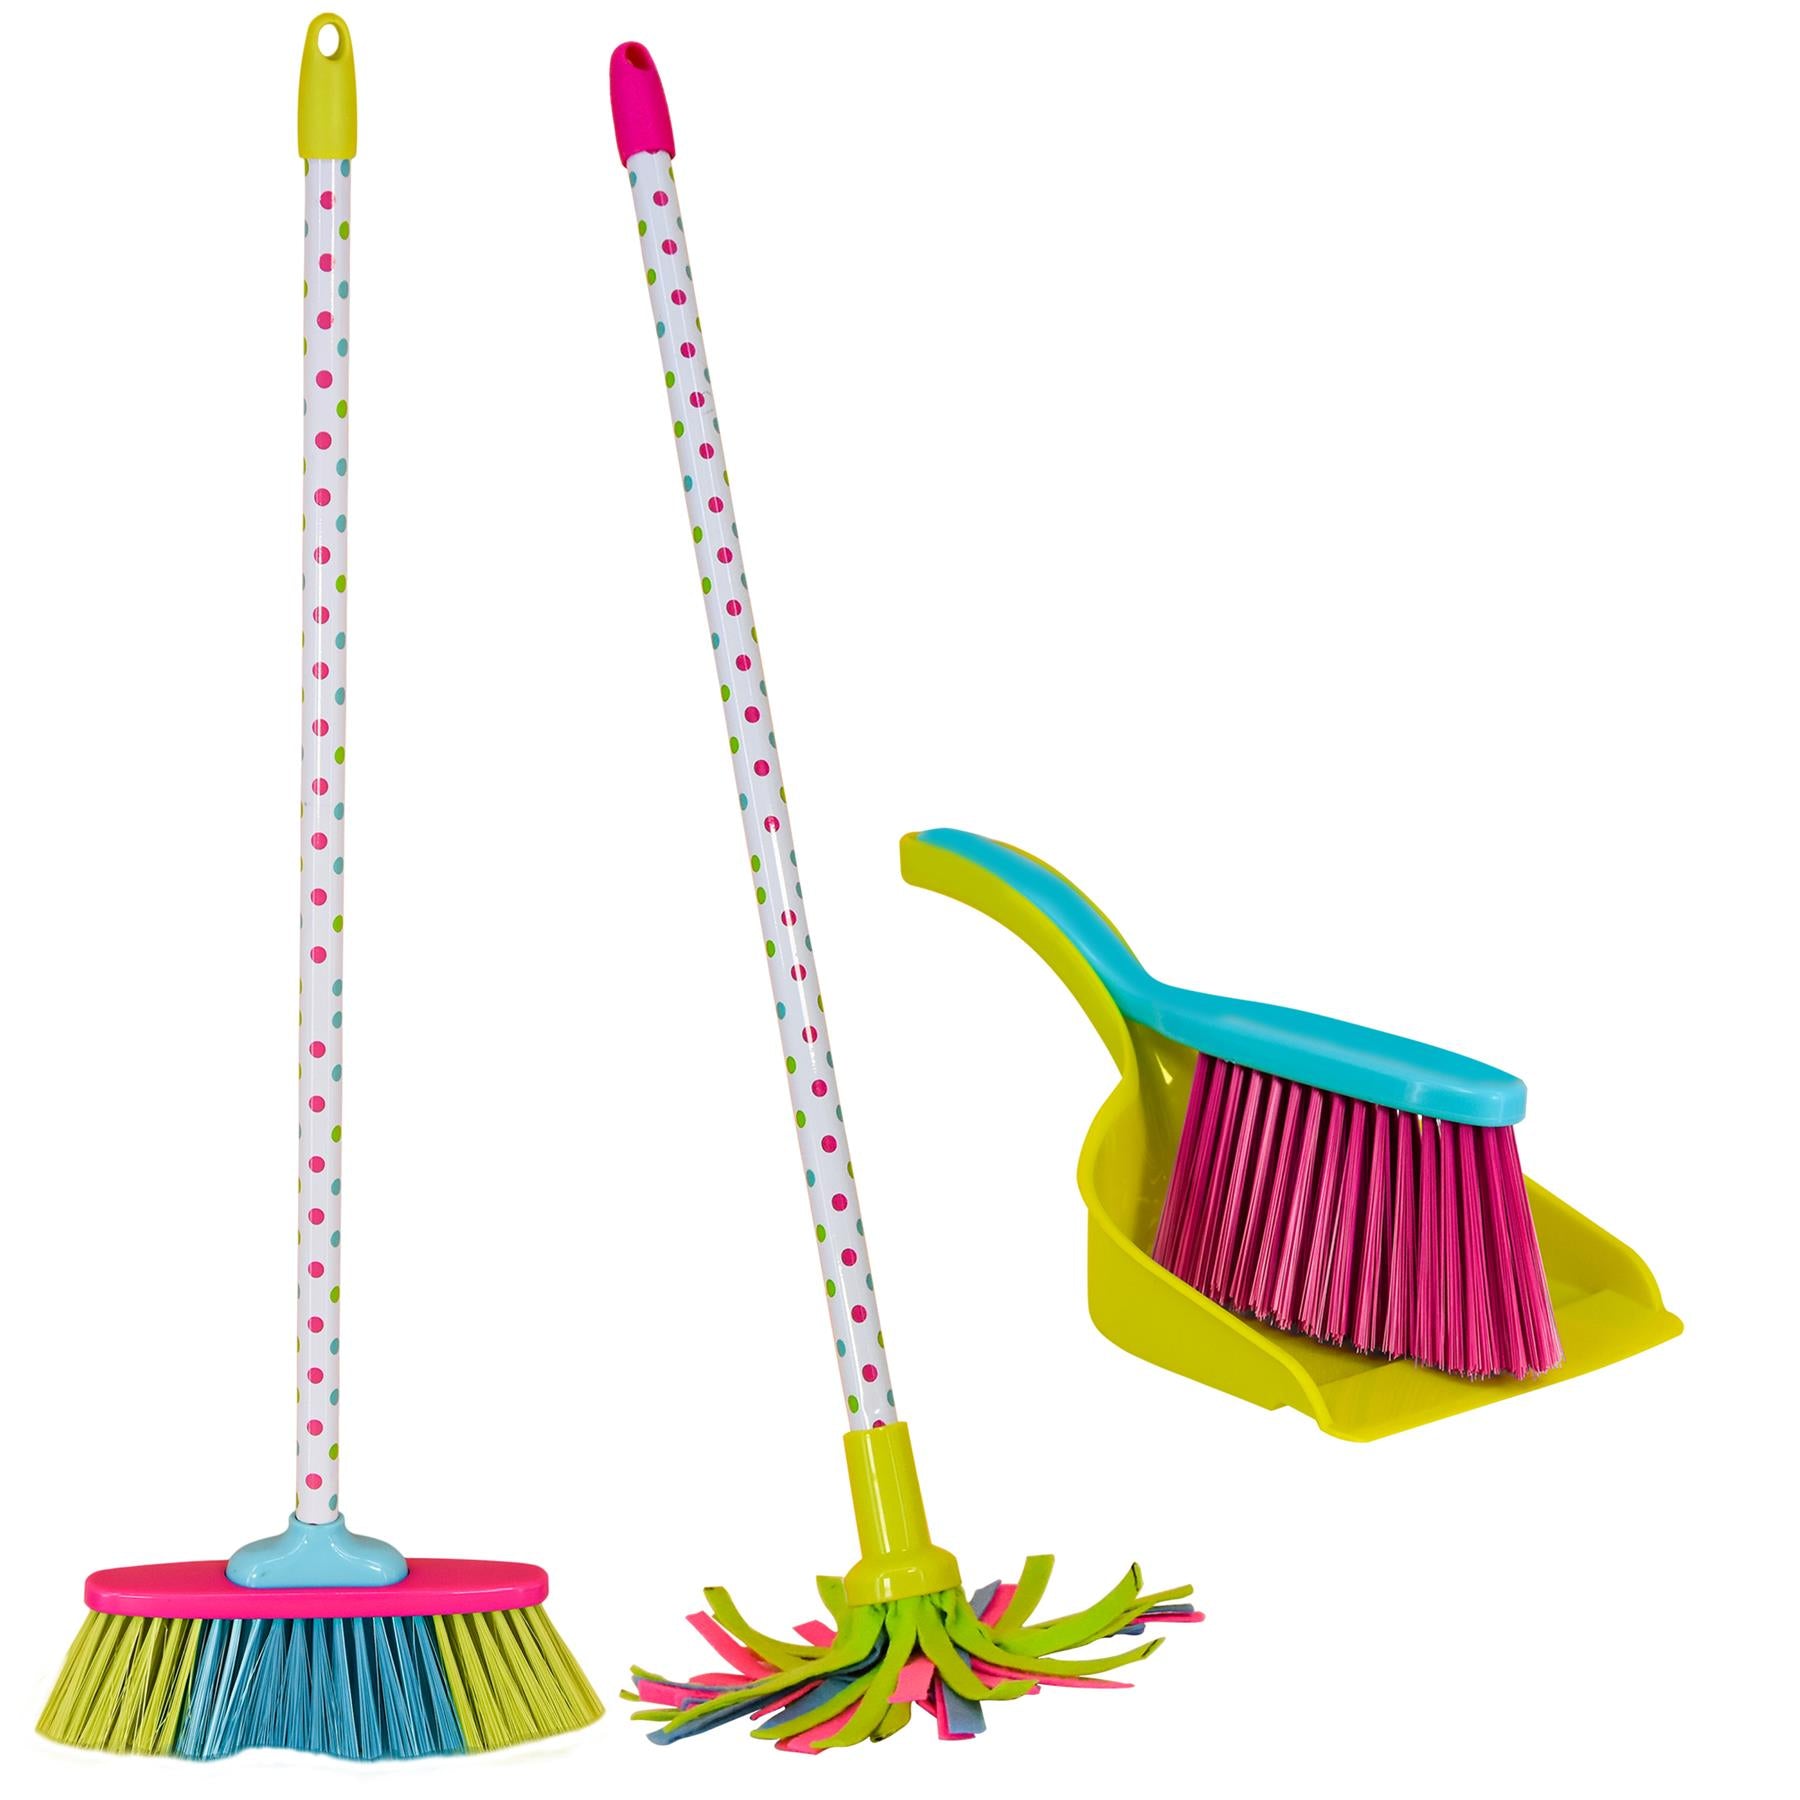 Kids Cleaning Play Set Toy by The Magic Toy Shop - UKBuyZone